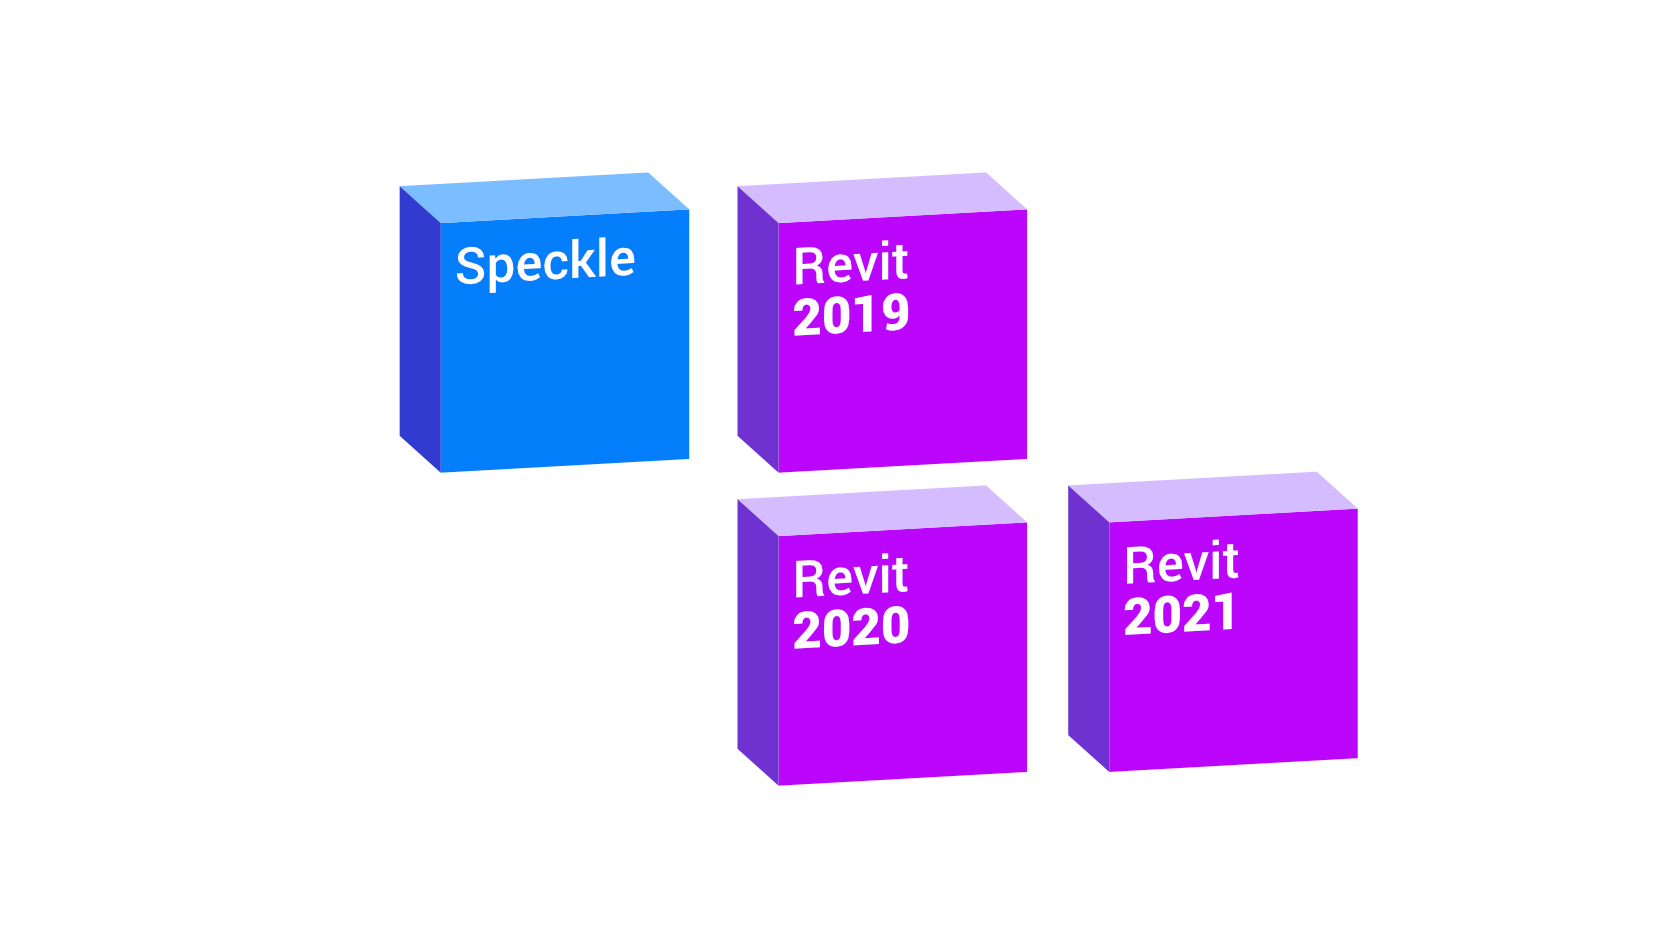 How we automated releases of Speckle for Revit 2019, 2020 and 2021 with different versions of CefSharp